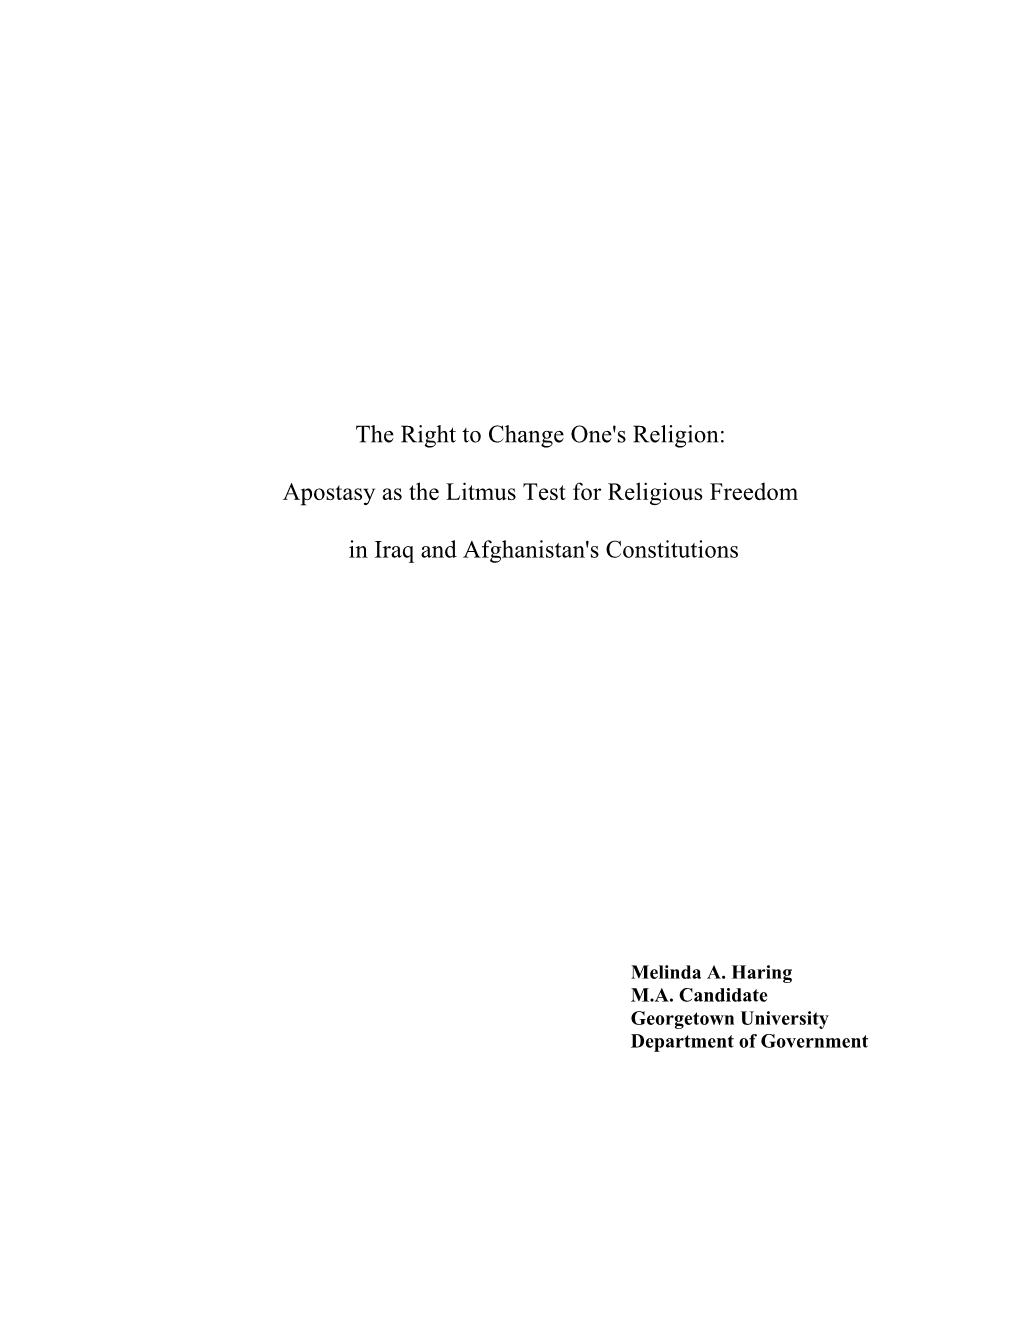 The Right to Change One's Religion: Apostasy As the Litmus Test For